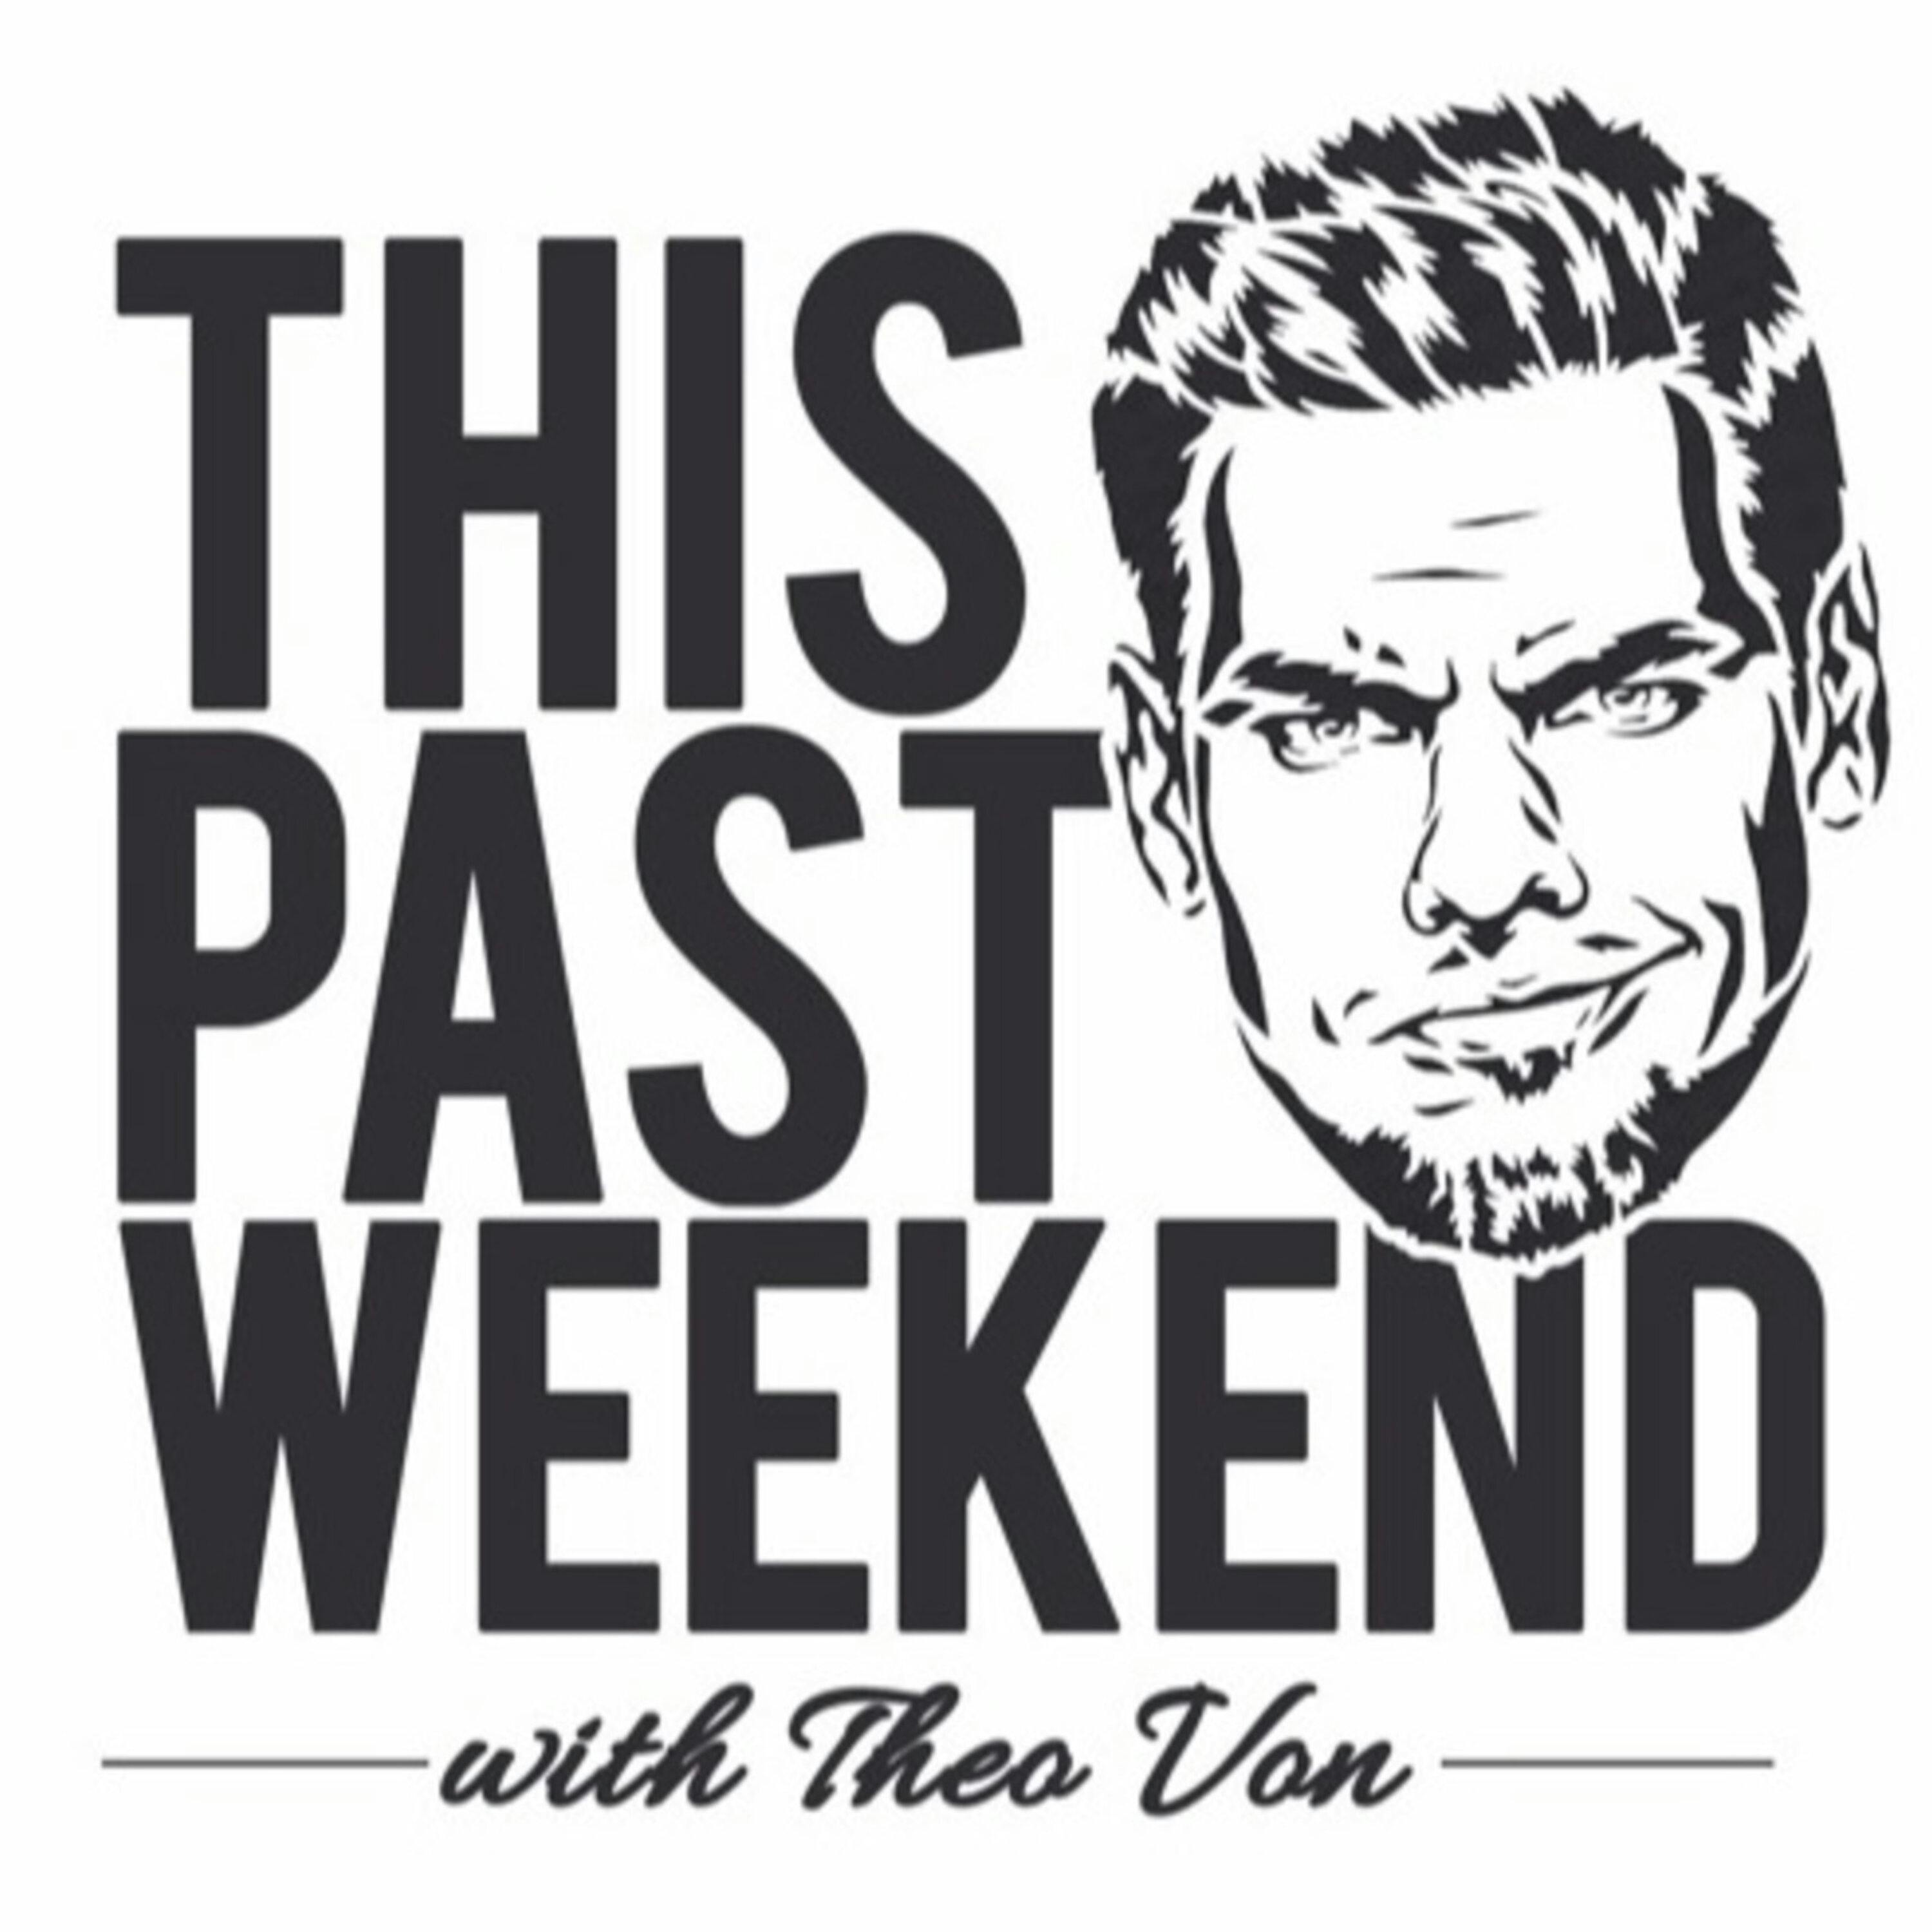 Follow Up: What is an American? | This Past Weekend #31 by Theo Von